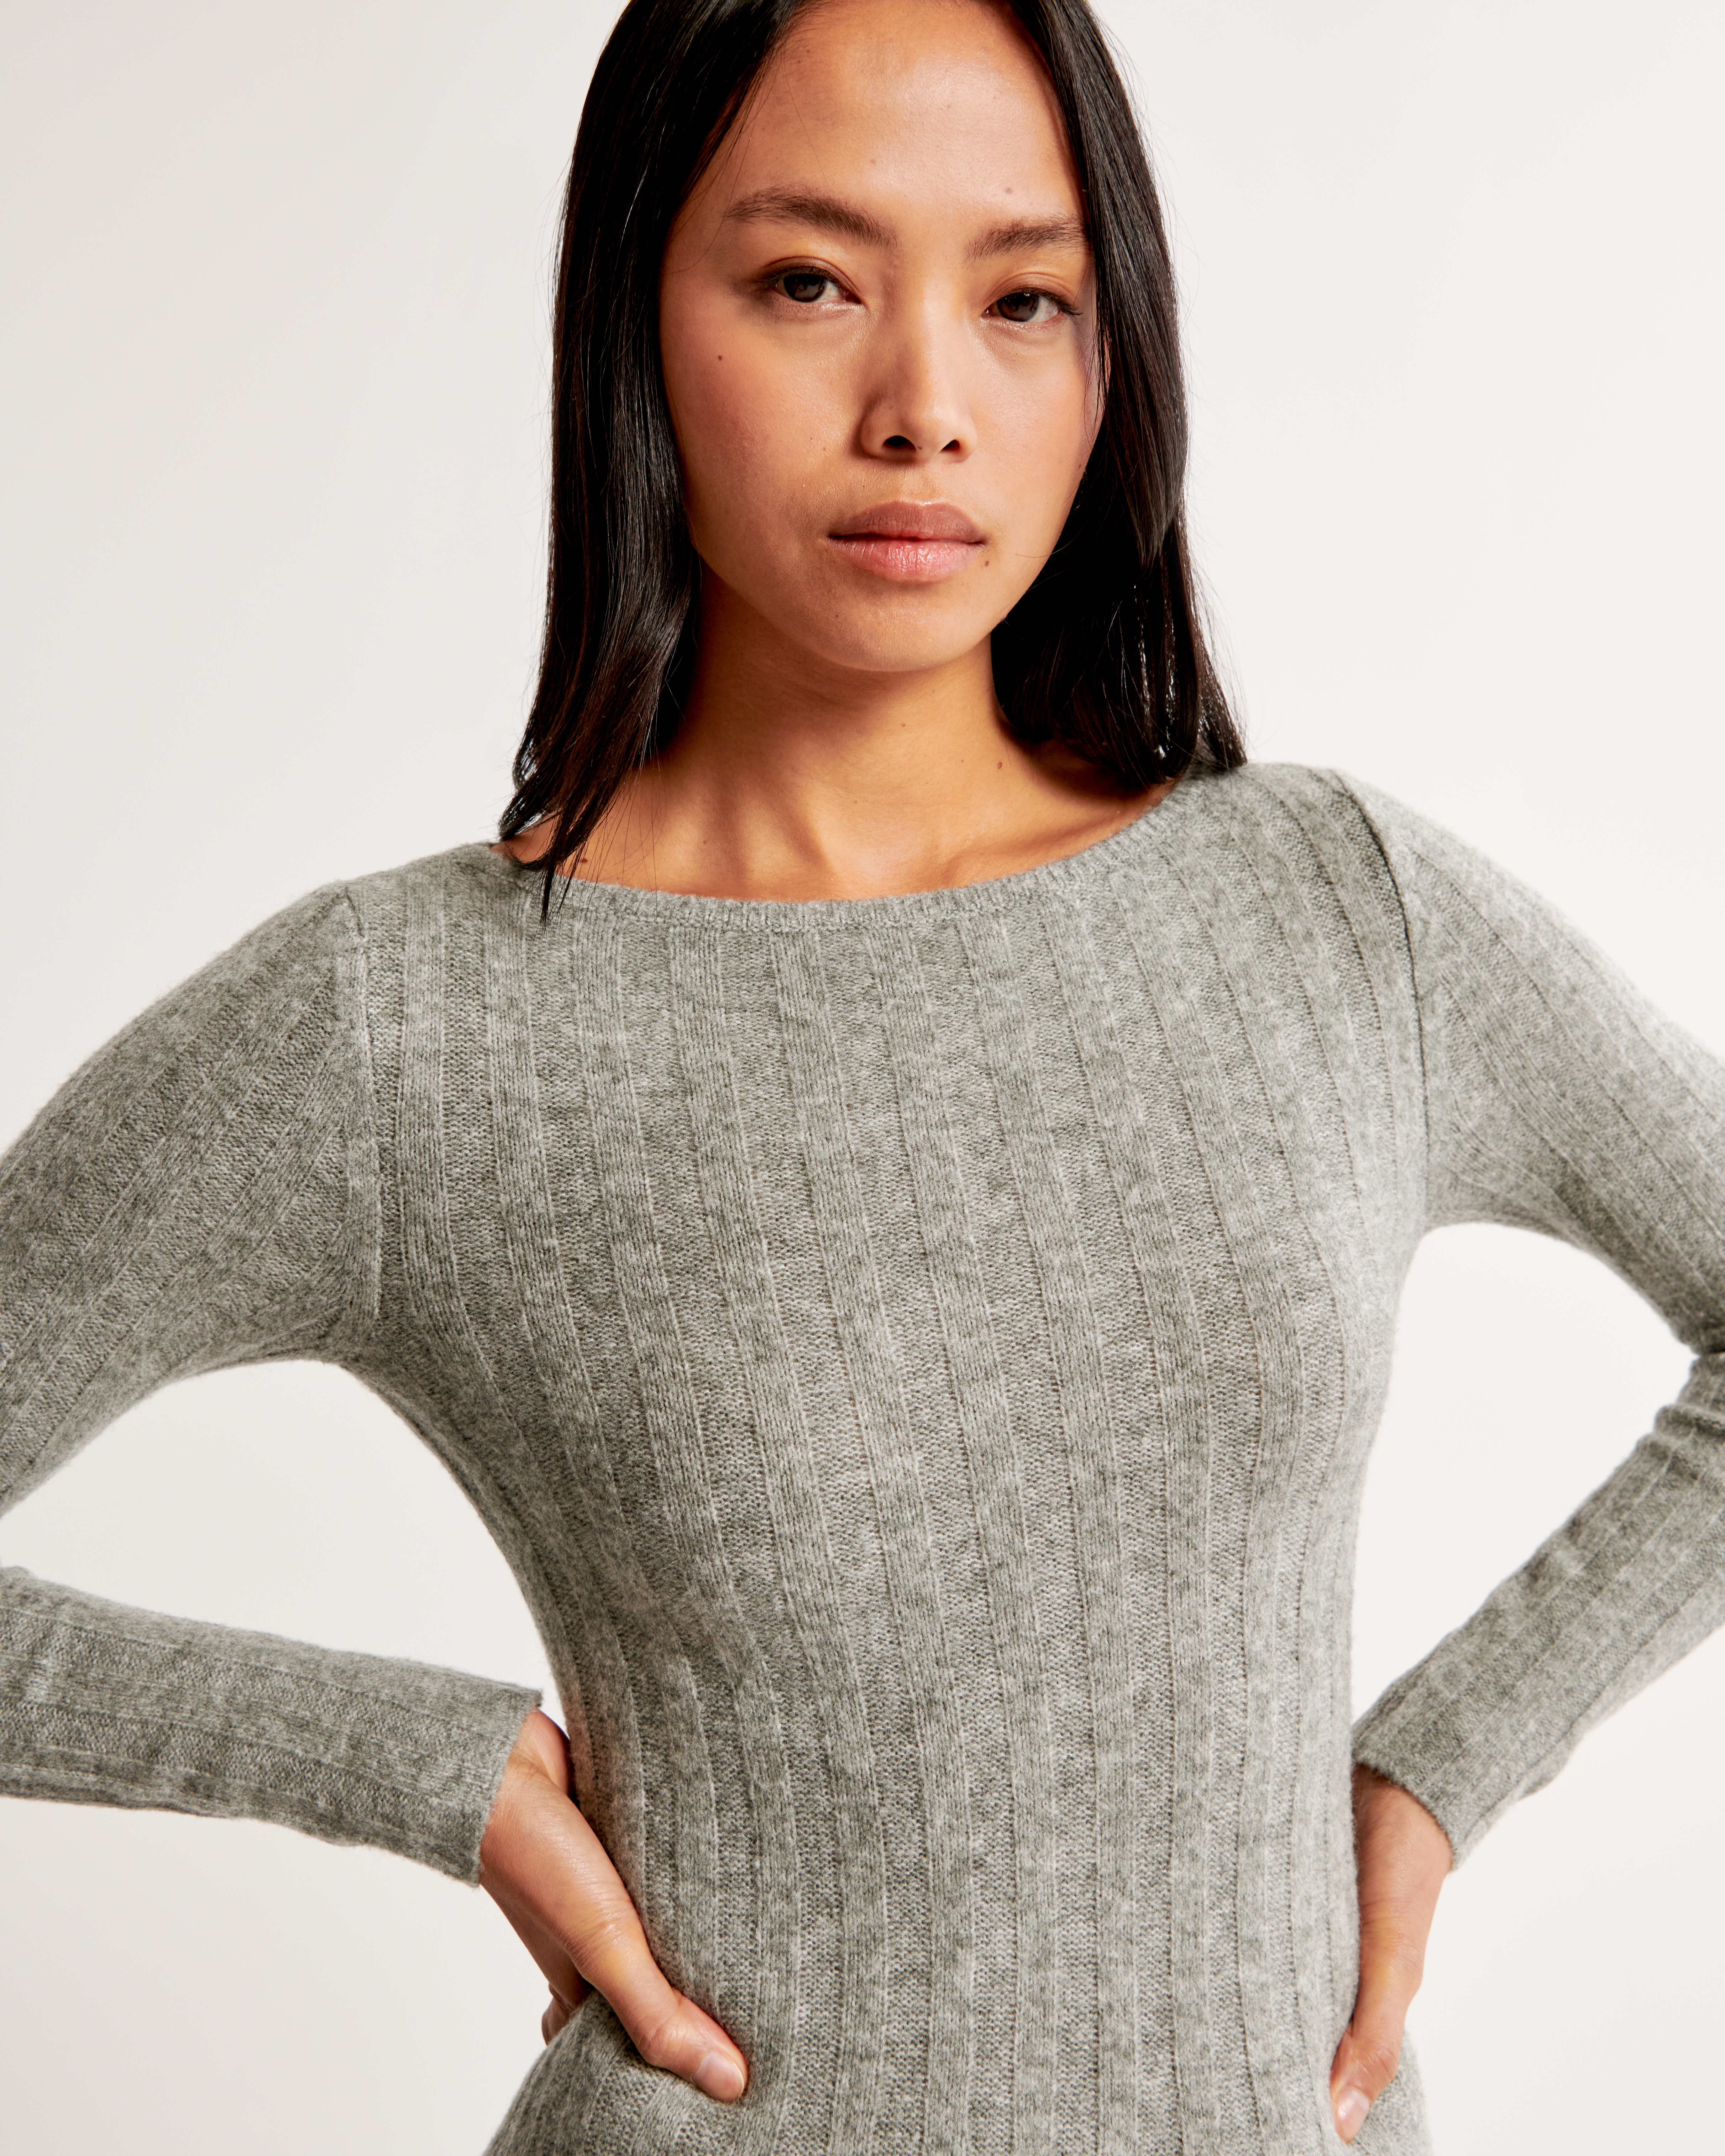 abercrombie and fitch jumper dress